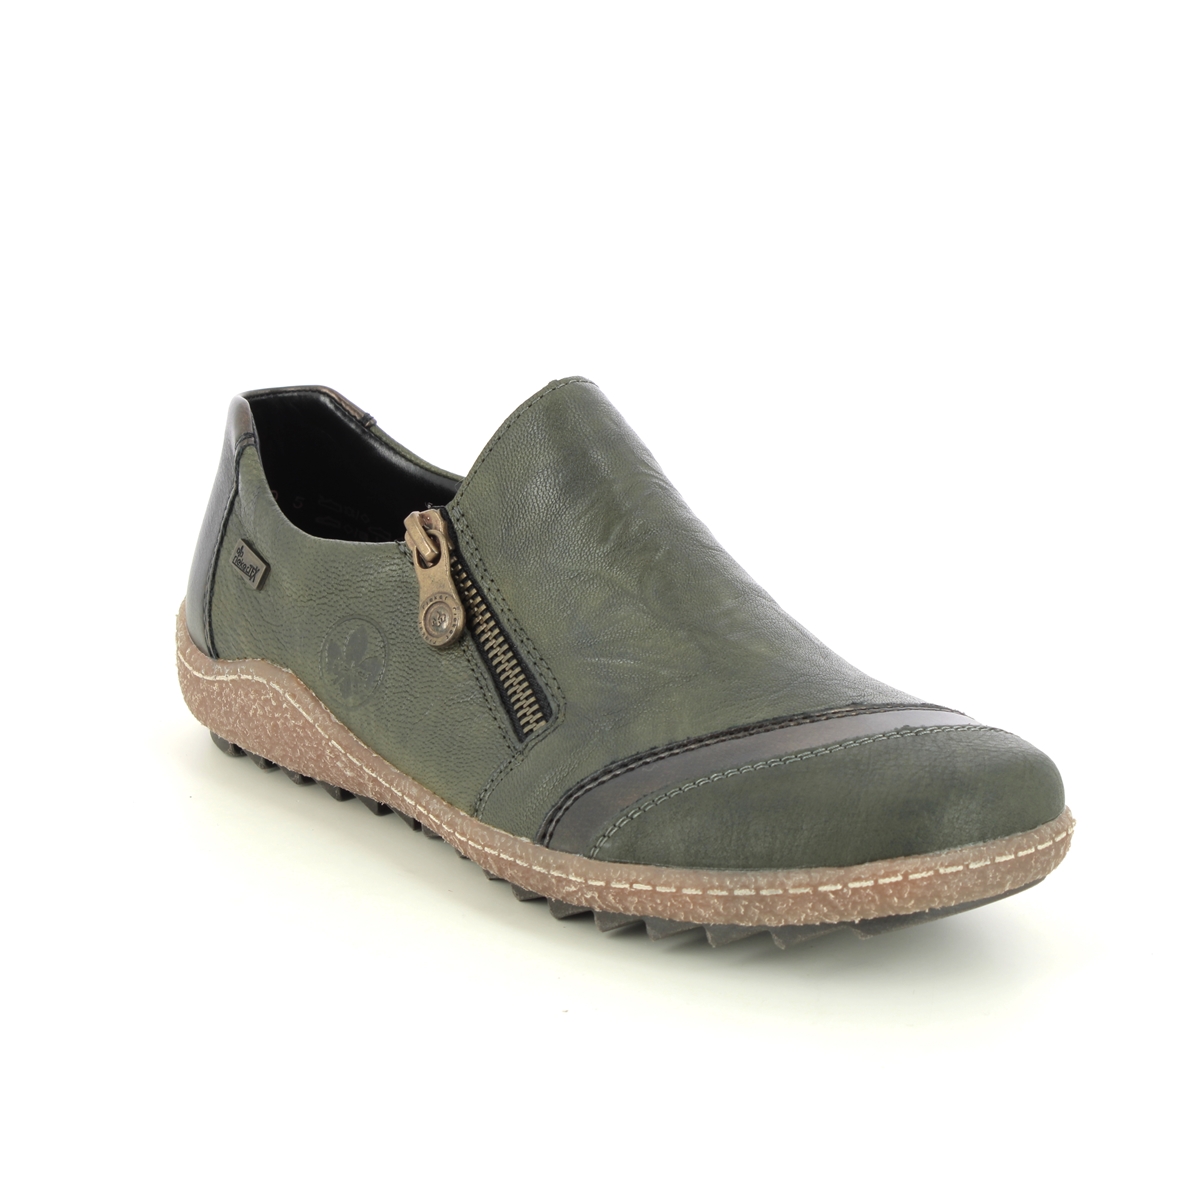 Rieker Zigshu Tex Olive Leather Womens Comfort Slip On Shoes L7571-54 In Size 40 In Plain Olive Leather